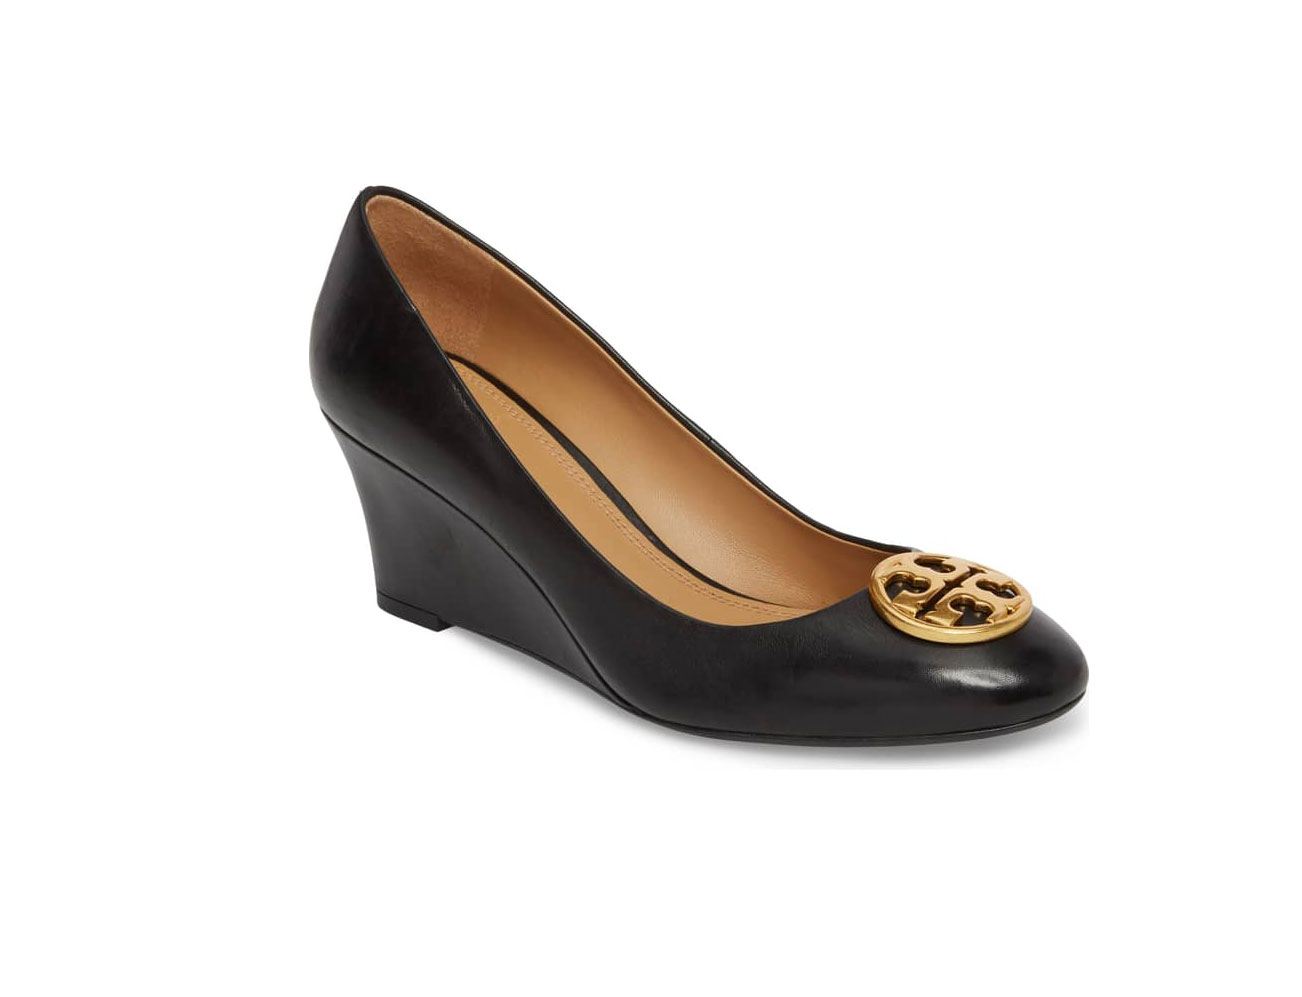 Tory Burch wedge shoes 